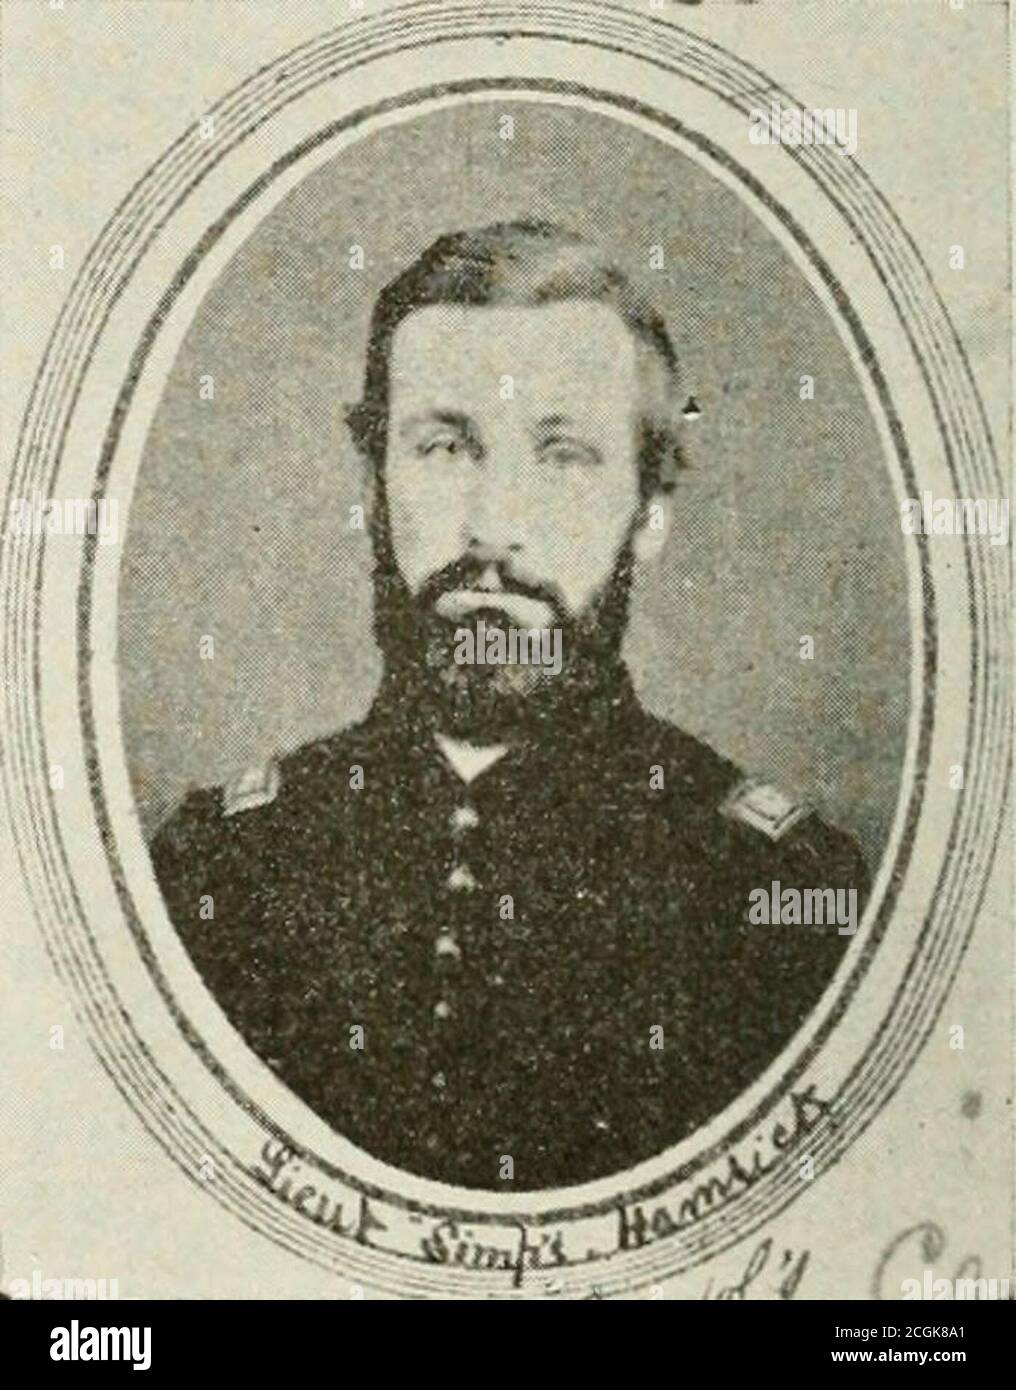 . The Twenty-seventh Indiana volunteer infantry in the war of the rebellion, 1861 to 1865. First division, 12th and 20th corps. A history of its recruiting, organization, camp life, marches and battles, together with a roster of the men composing it .. . Capt. Wm. H. Hollowav, First-Lieut. S. S. Hamrick, Company I. Company A. (Killed at Chancellorsville.) This is more to be regretted as, being overshadowed bythe larger corps of Sickles, by which it was at first supported,with which it was later intermingled in part, and by whichmost of its regiments were eventually relieved, the TwelfthCorps h Stock Photo